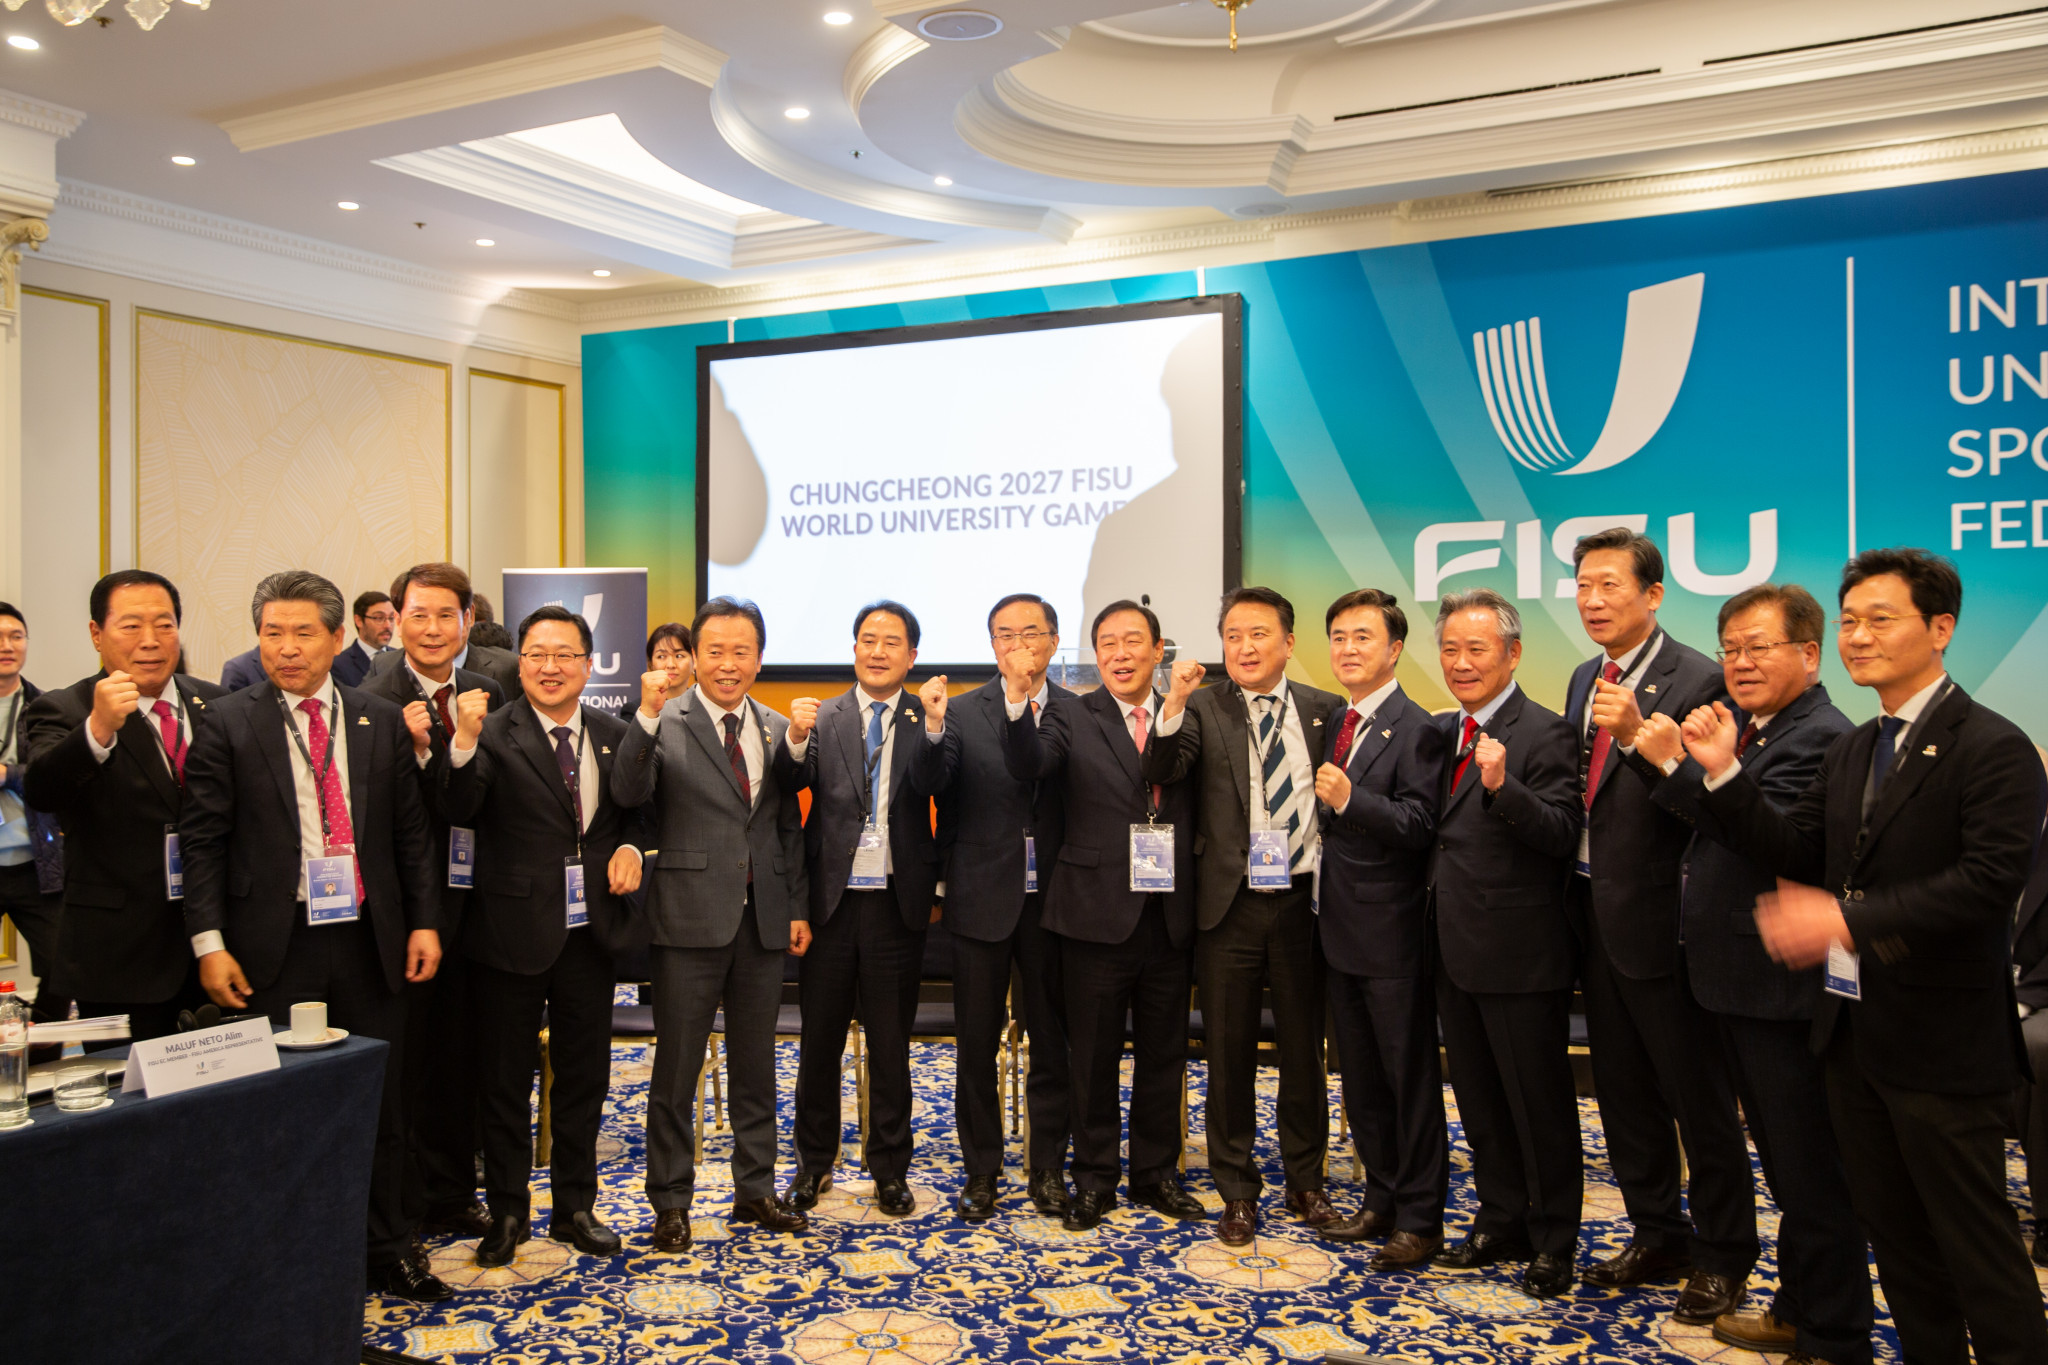 Chungcheong was awarded hosting rights for the 2027 FISU Games in November last year, but an Organising Committee is yet to be established ©FISU